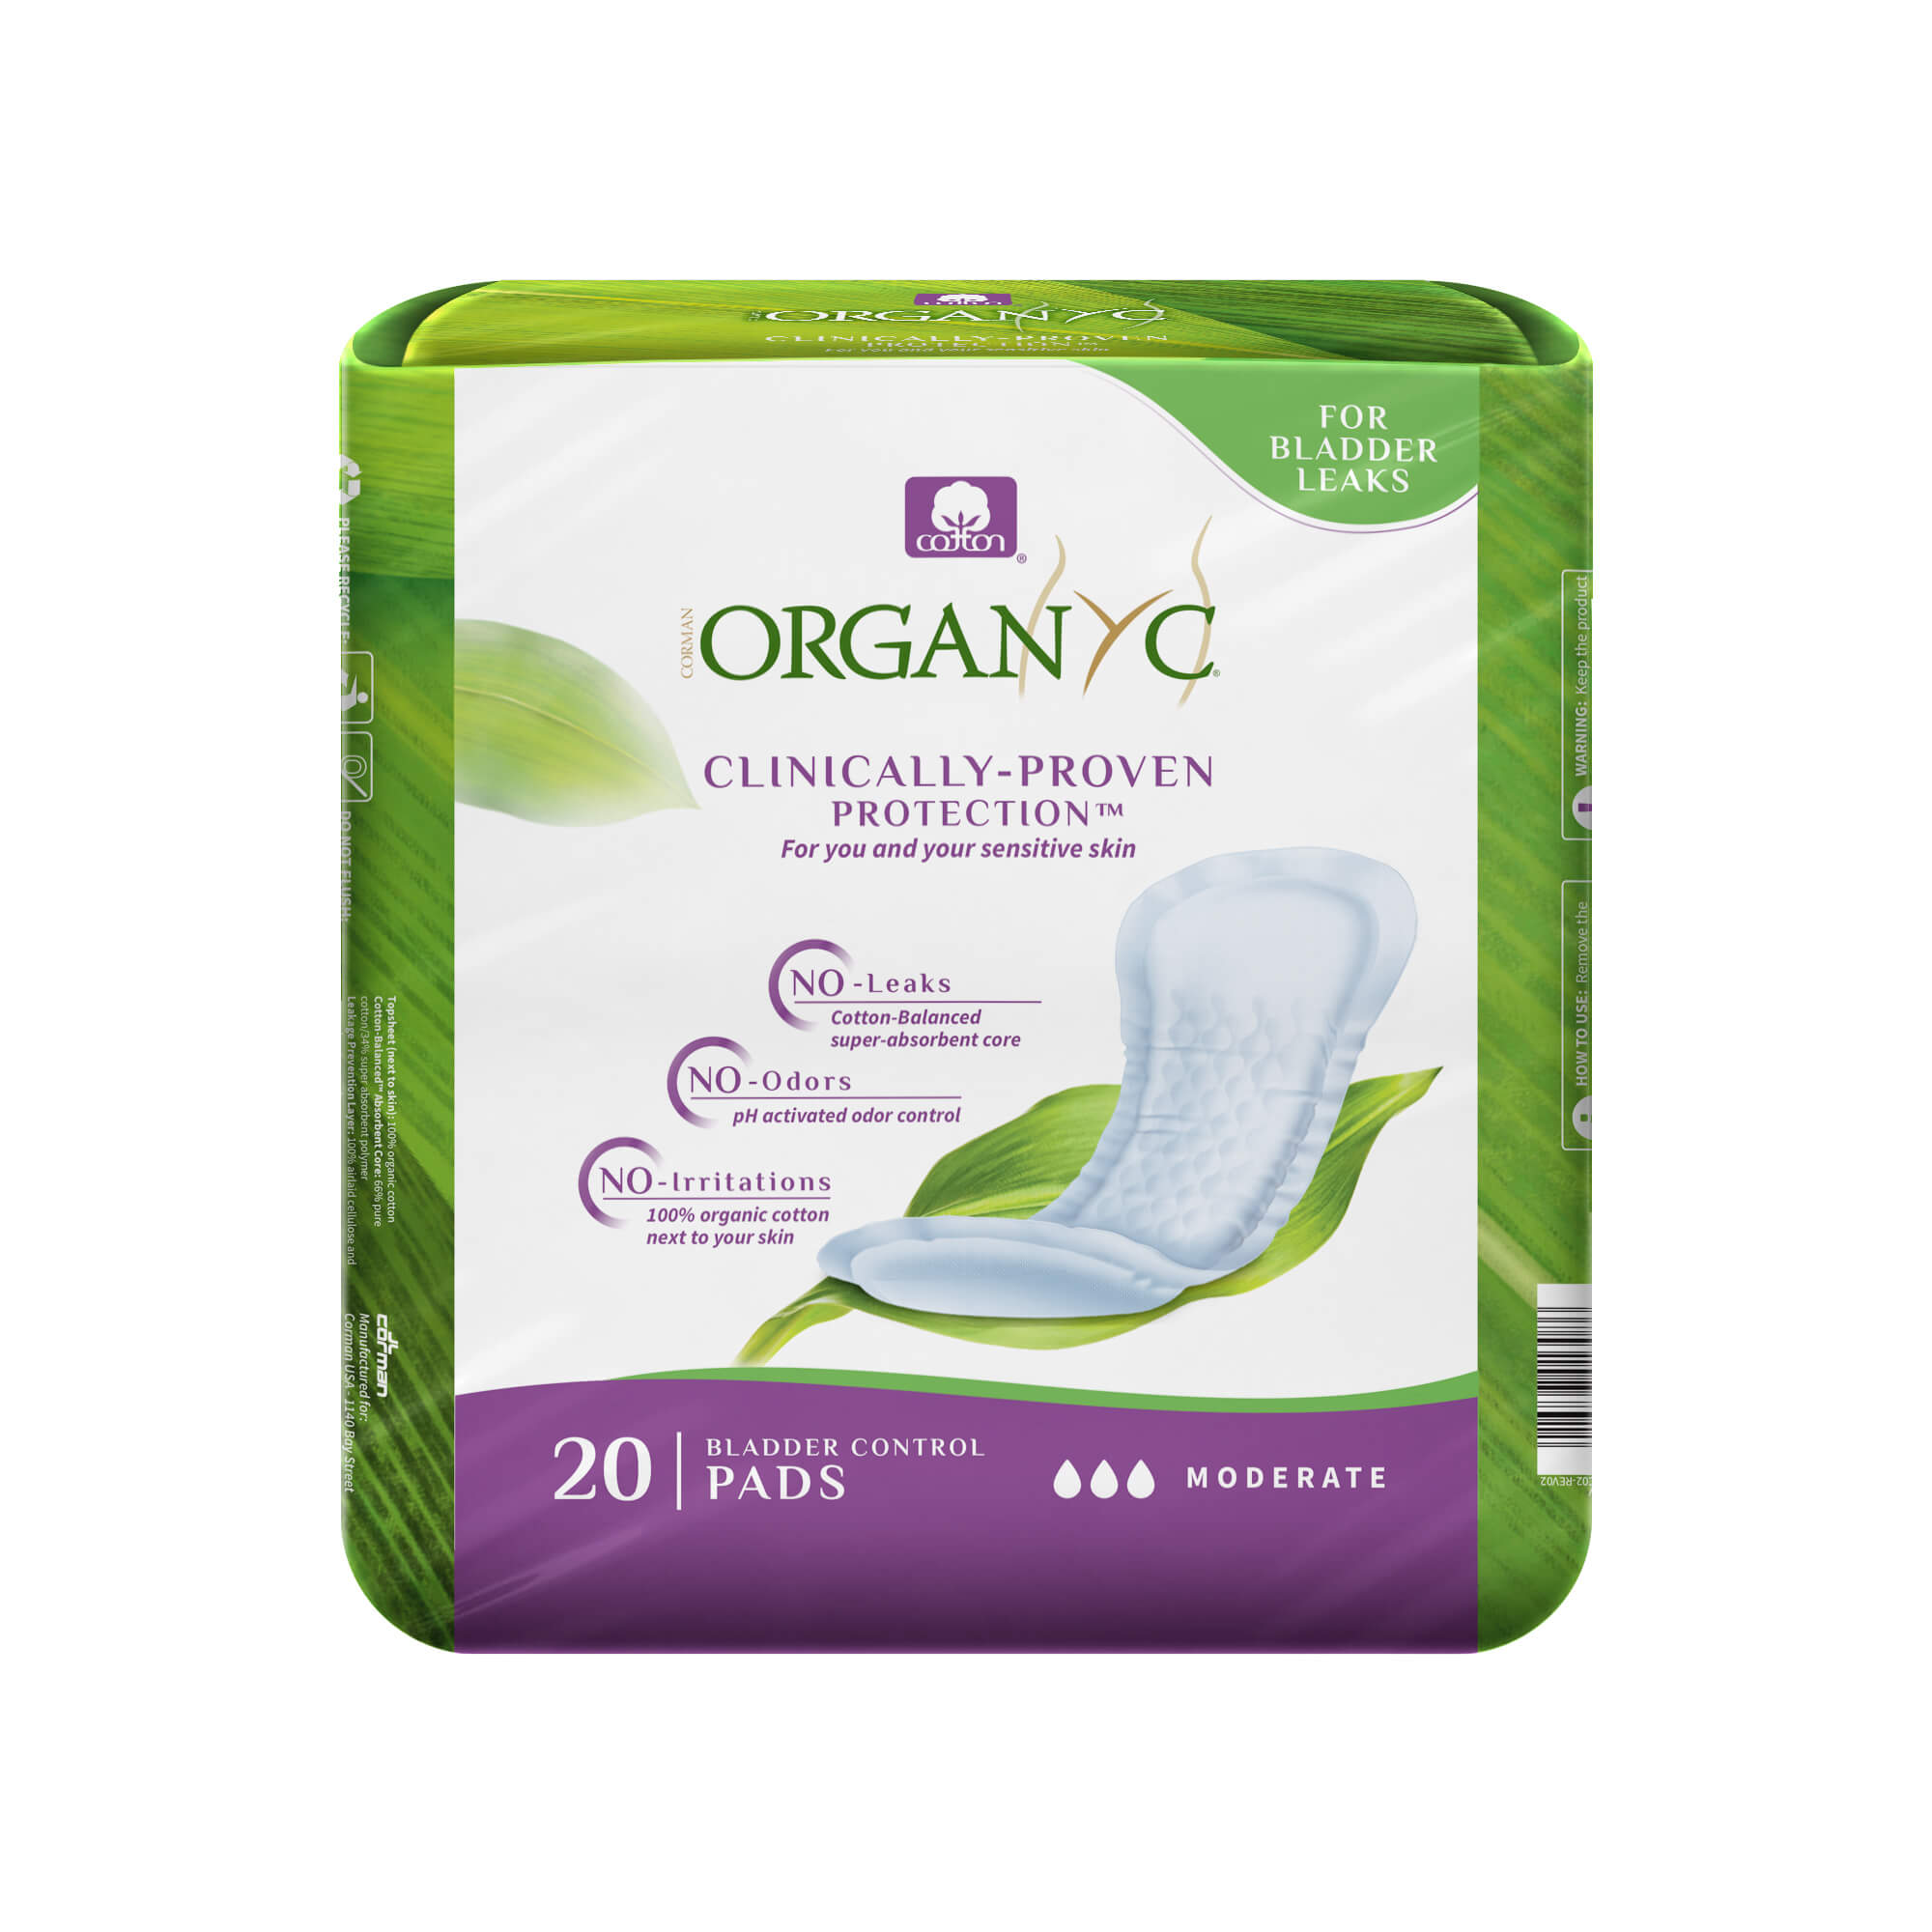 Orginial Moderate Absorbency Incontinence Pads